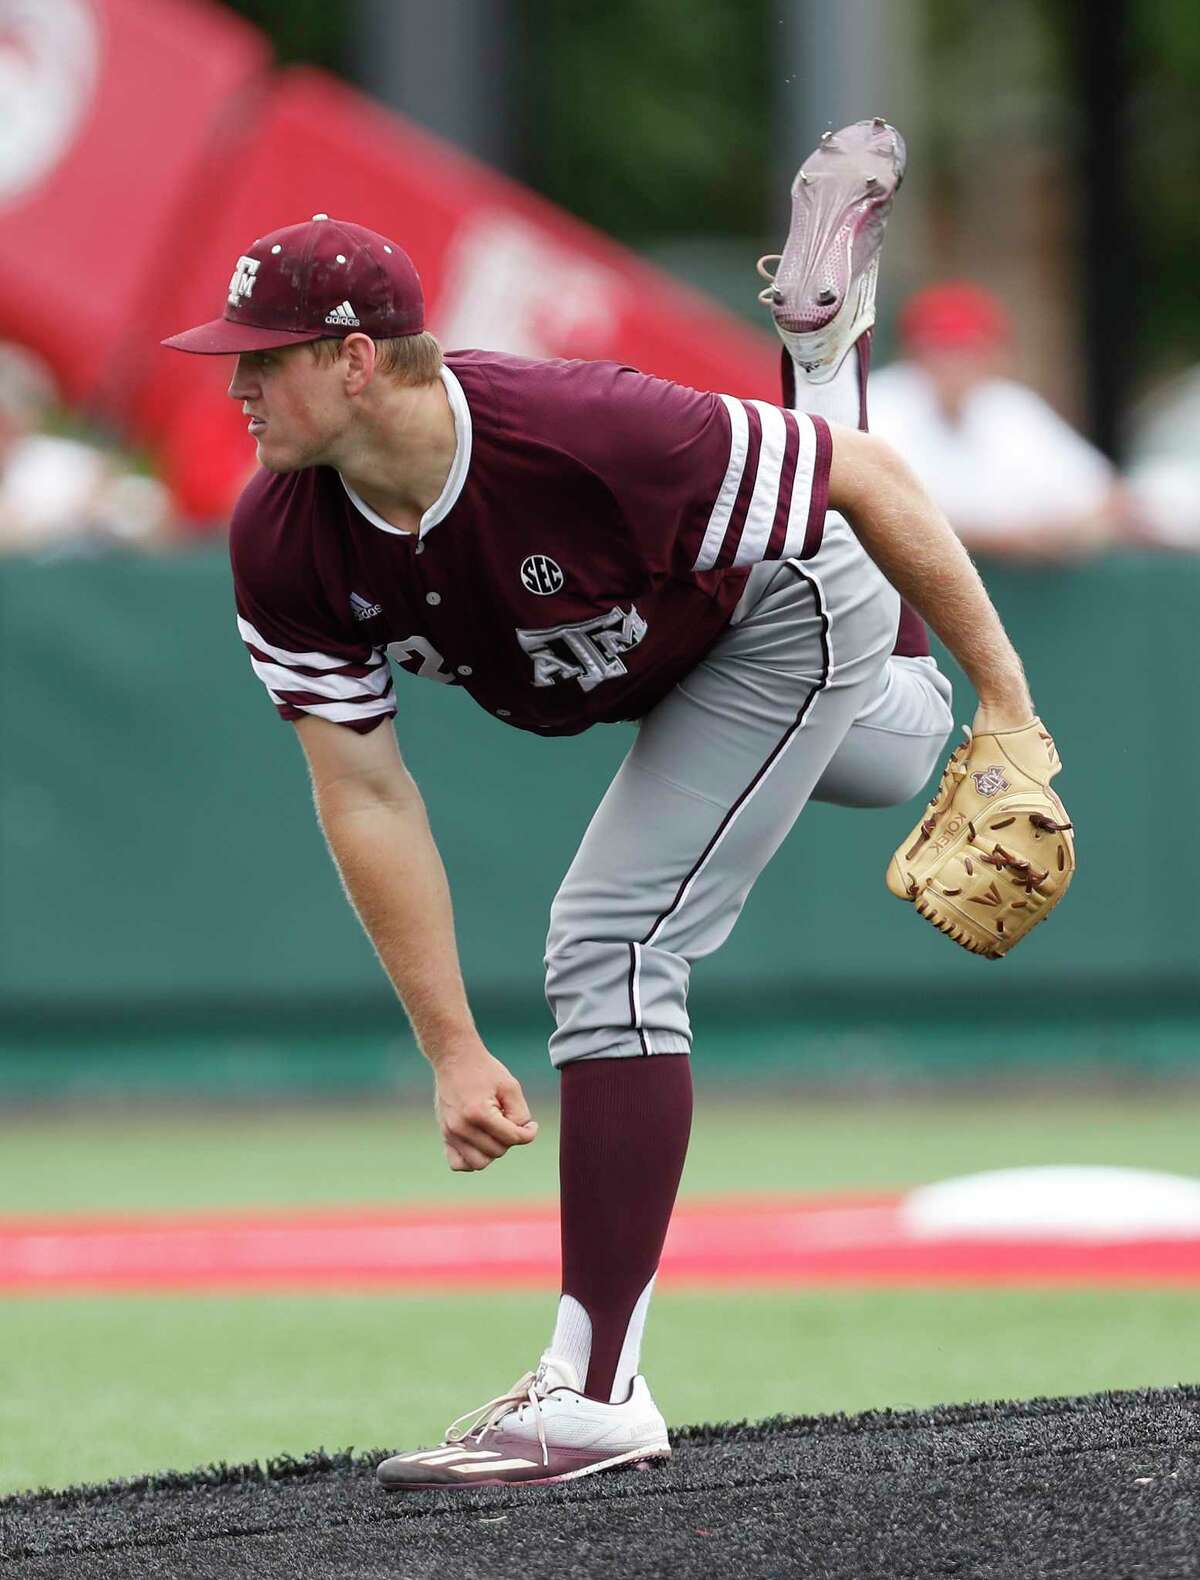 Texas A&M pitcher Stephen Kolek (32) pitches during the first inning of Game 6 of an NCAA Regional baseball game at Schroeder Park, in Houston, Monday, June, 5, 2017. ( Karen Warren / Houston Chronicle )